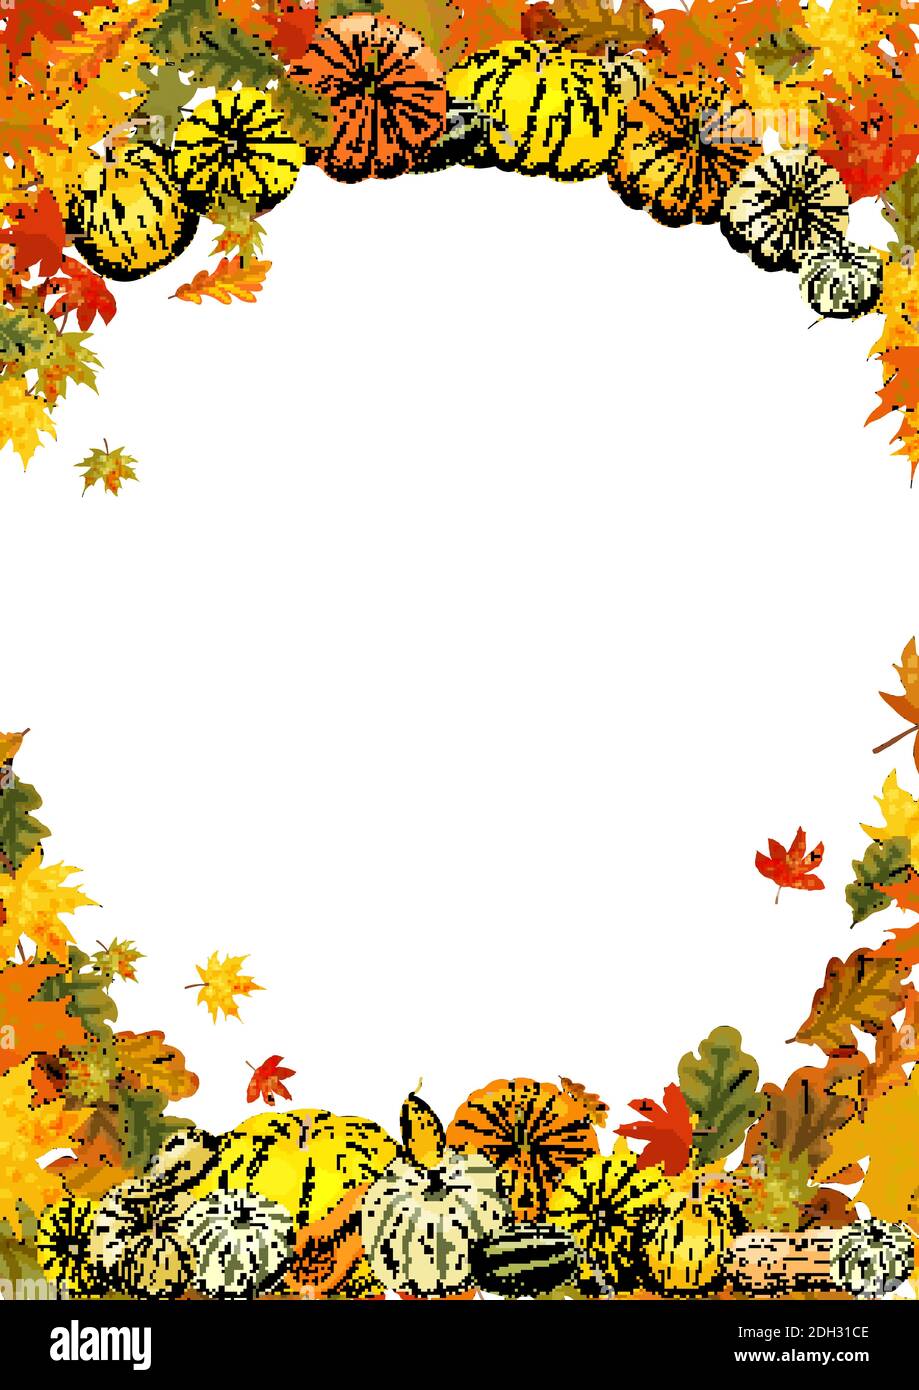 Autumn frame isolated on white background. Pumpkins, leaves, acorns. Stock Vector